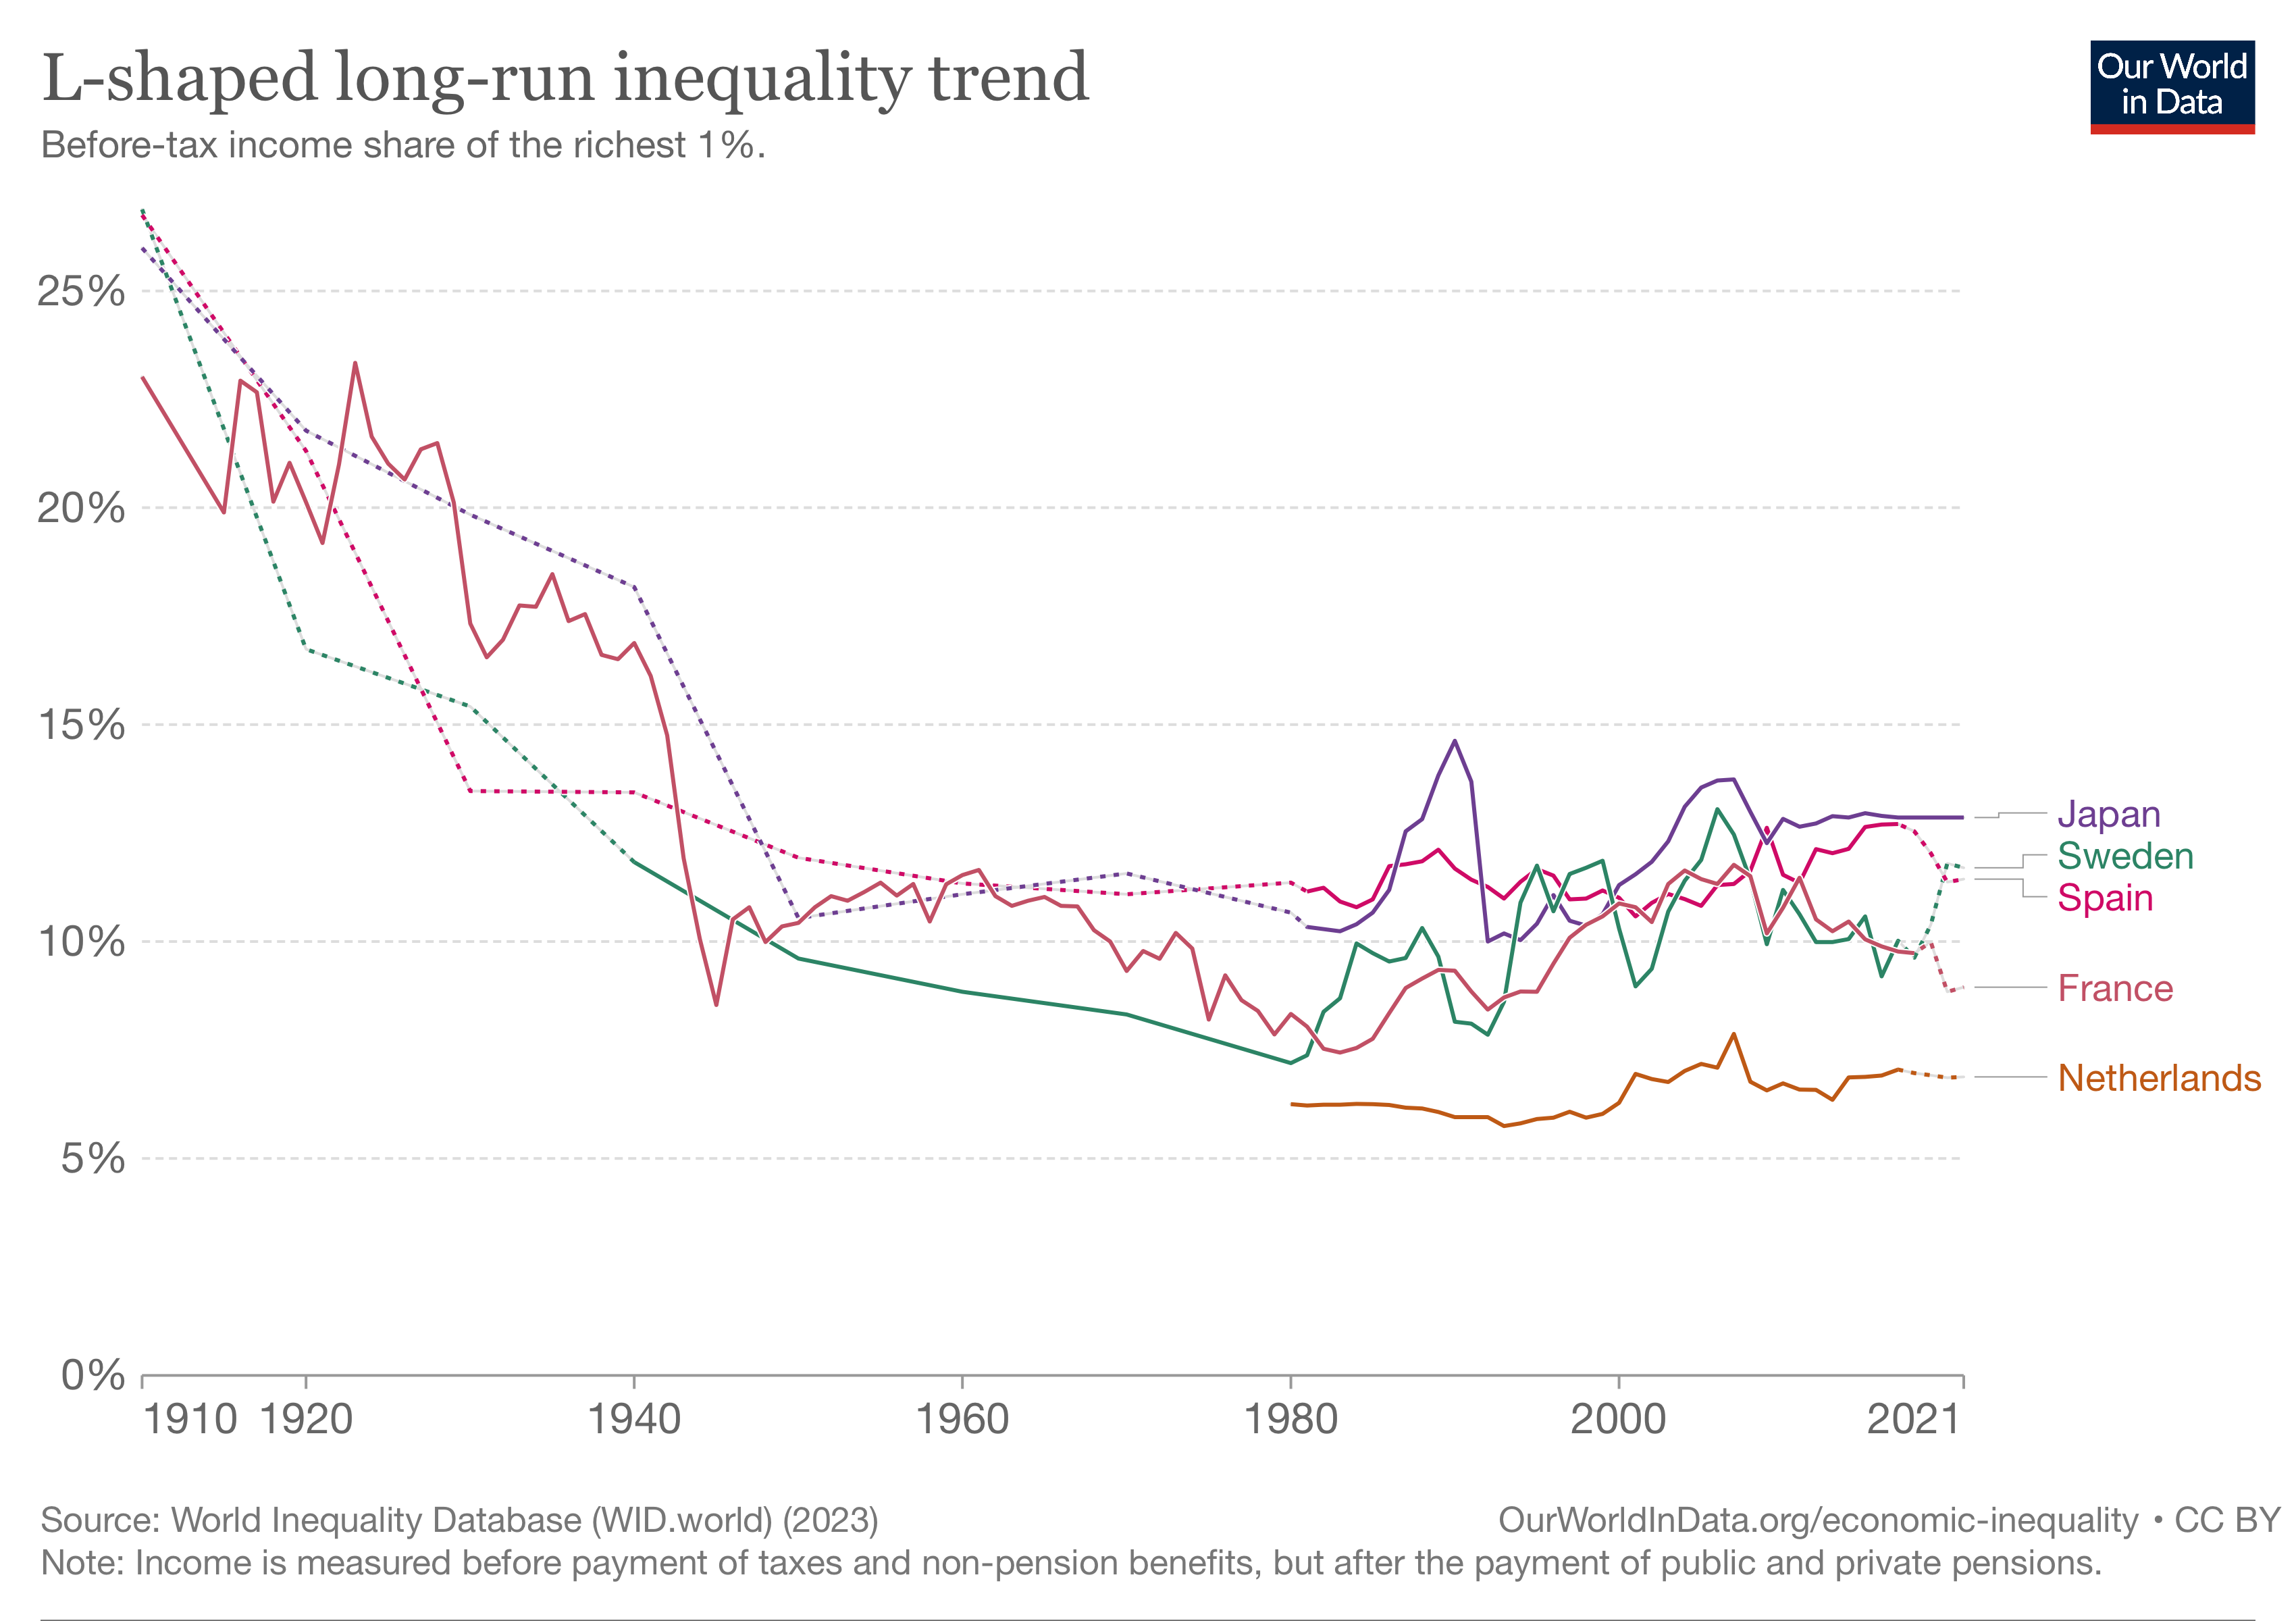 A graph showing the long gun inequality trend.